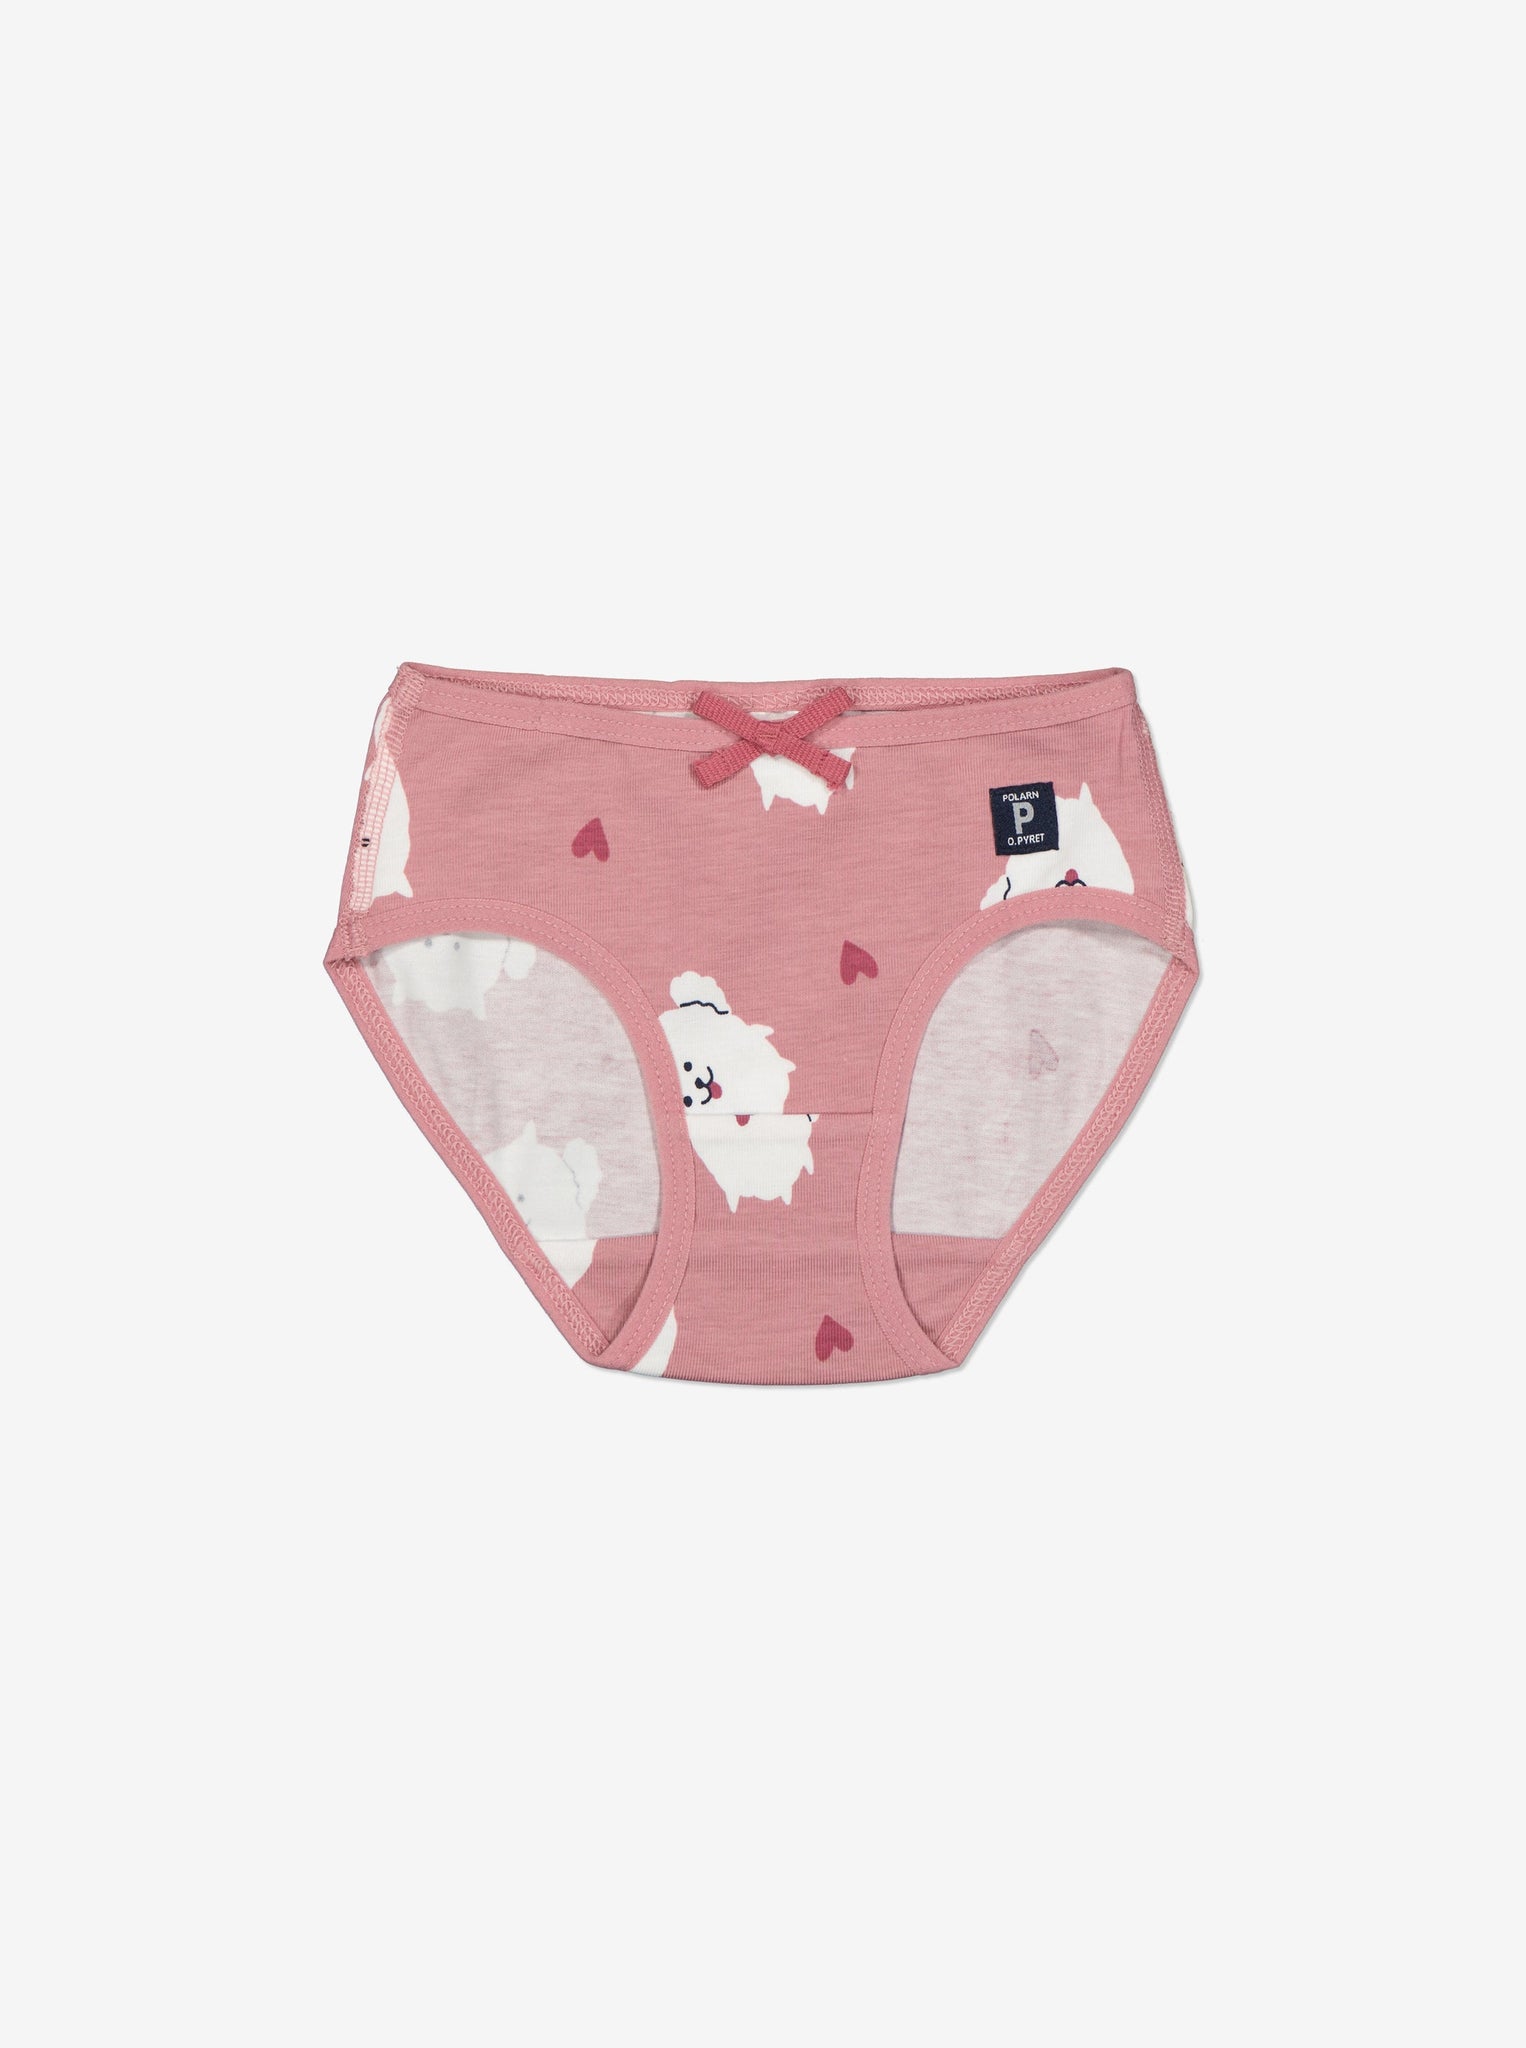 Organic Cotton Pink Girls Briefs from the Polarn O. Pyret Kidswear collection. The best ethical kids clothes